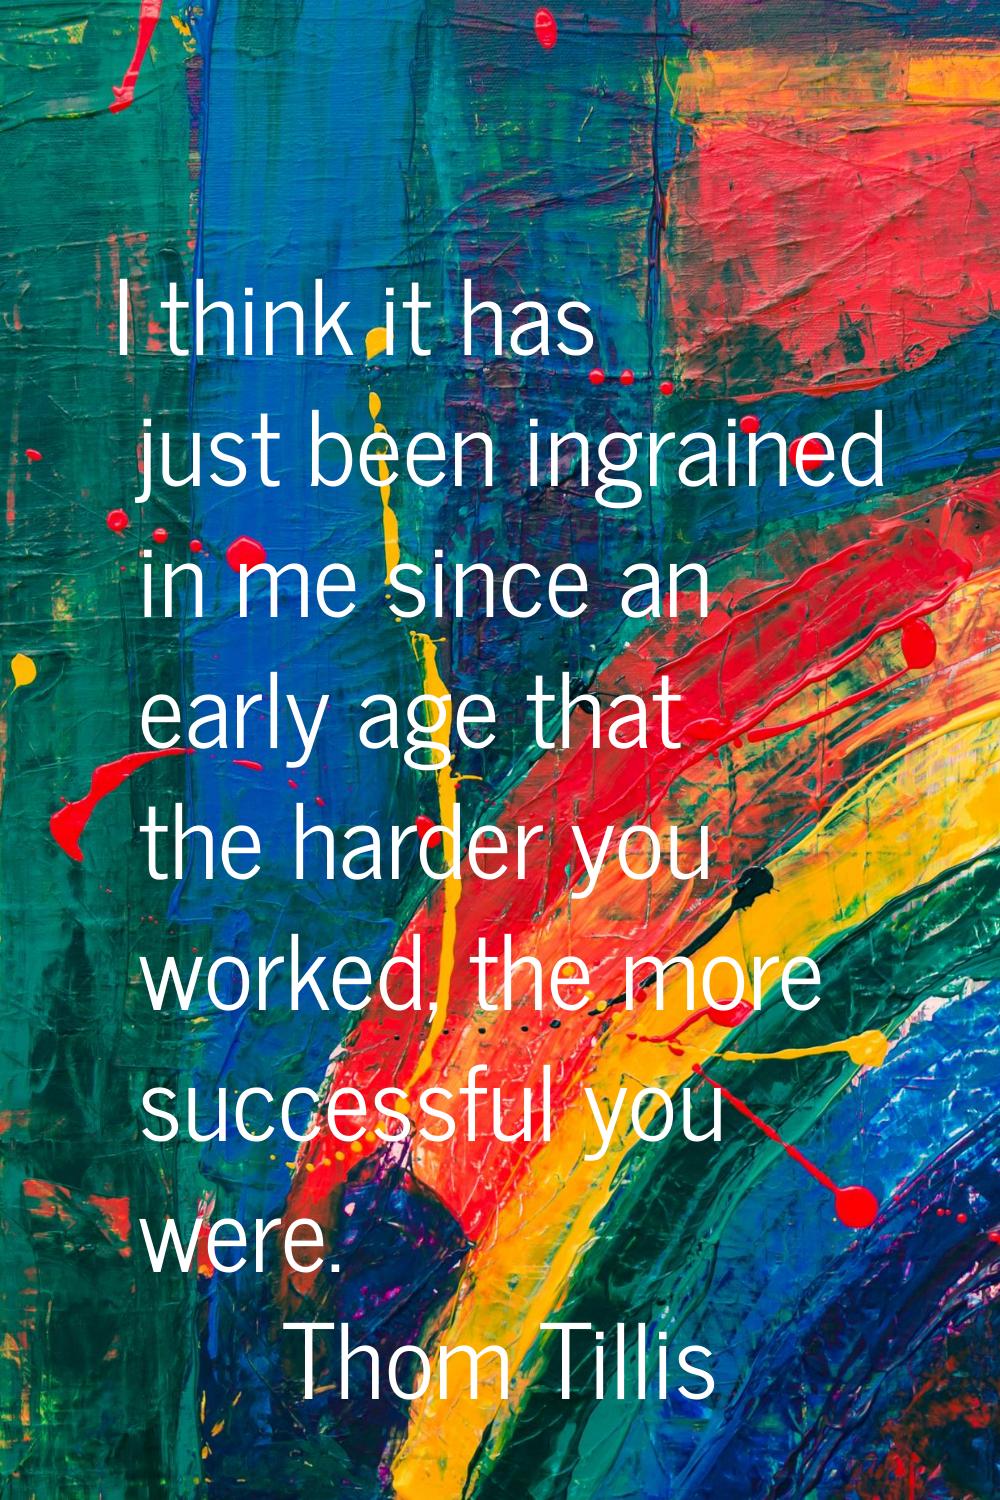 I think it has just been ingrained in me since an early age that the harder you worked, the more su